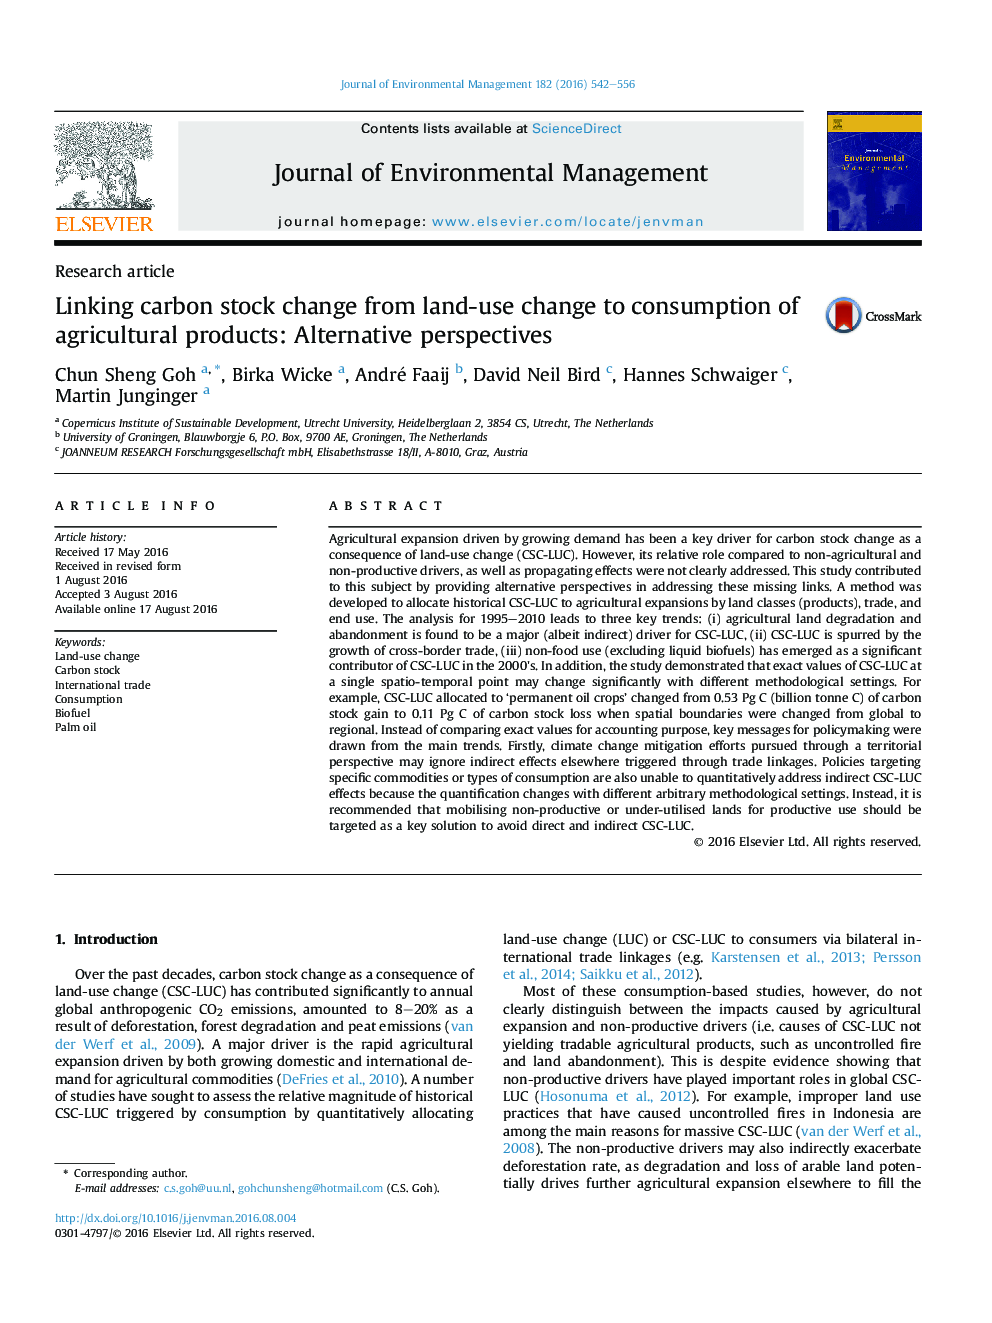 Linking carbon stock change from land-use change to consumption of agricultural products: Alternative perspectives